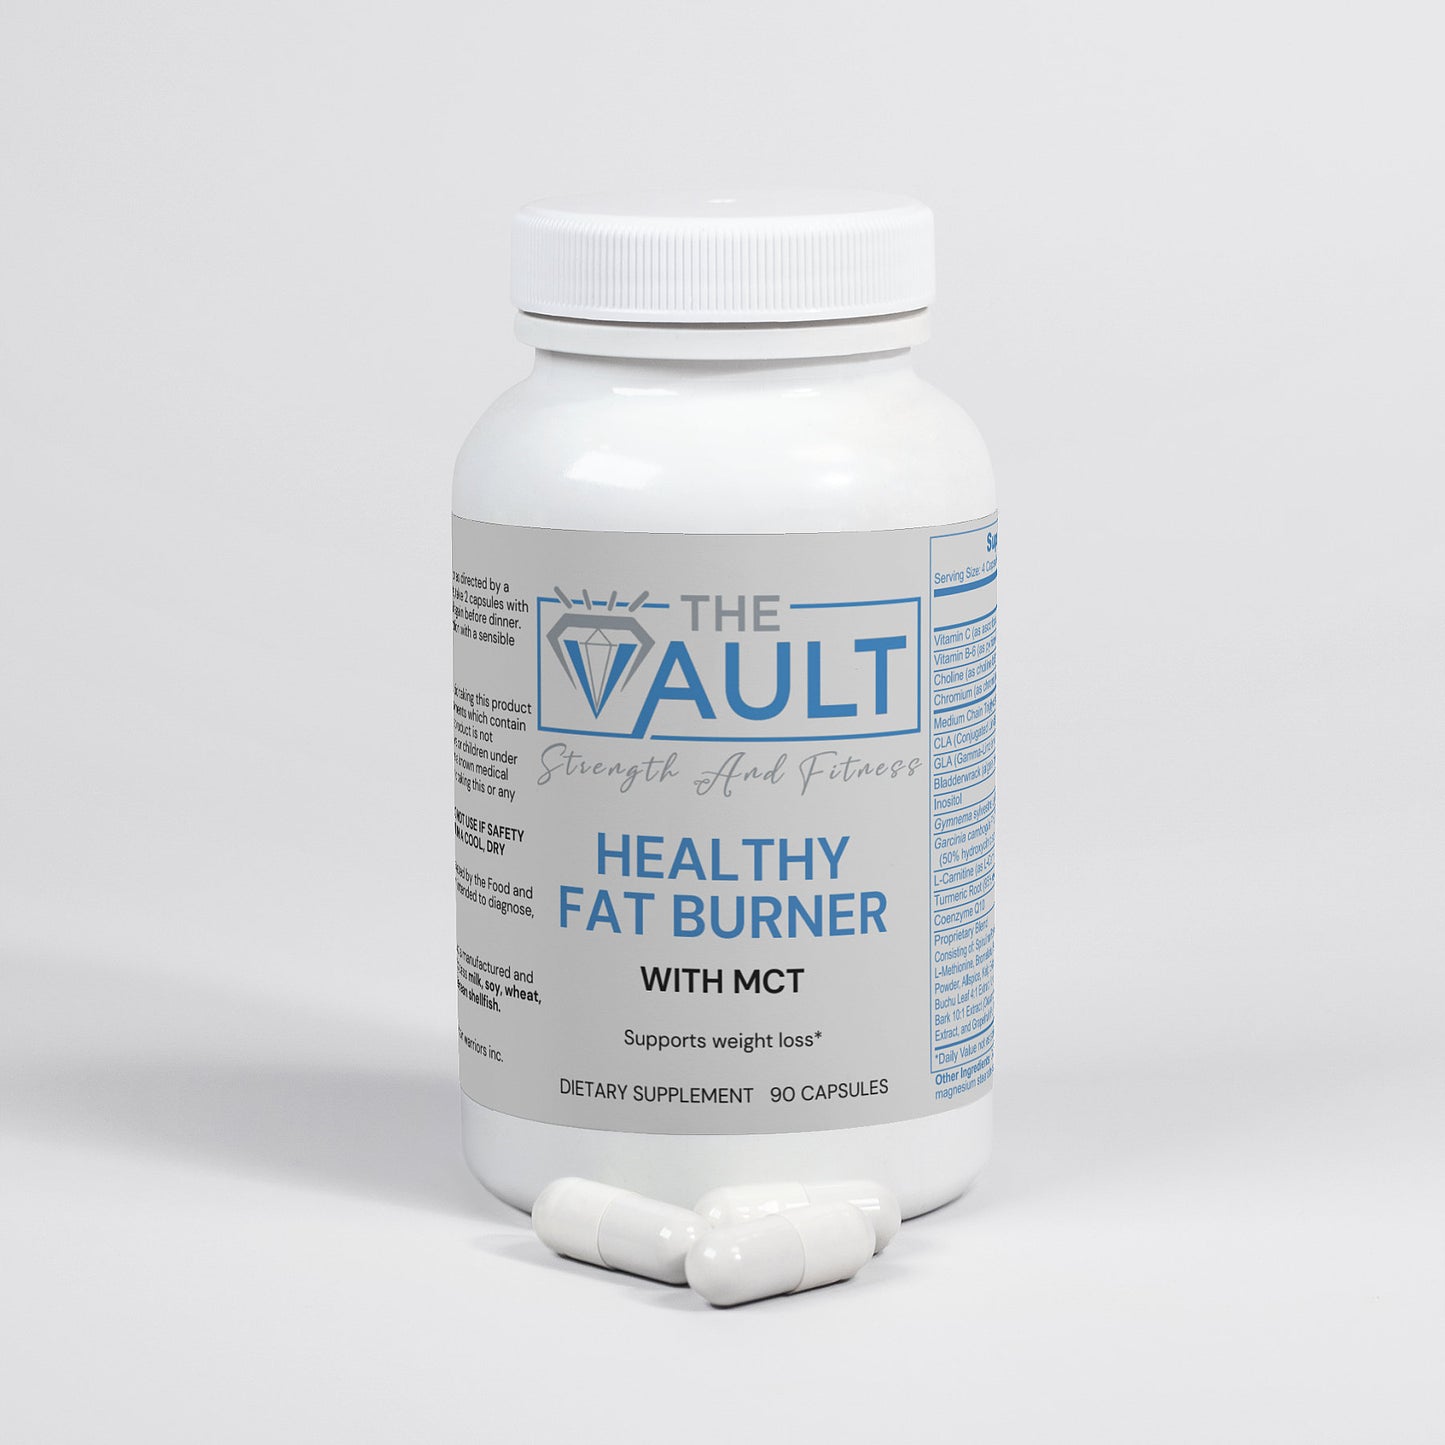 HEALTHY Fat Burner with MCT